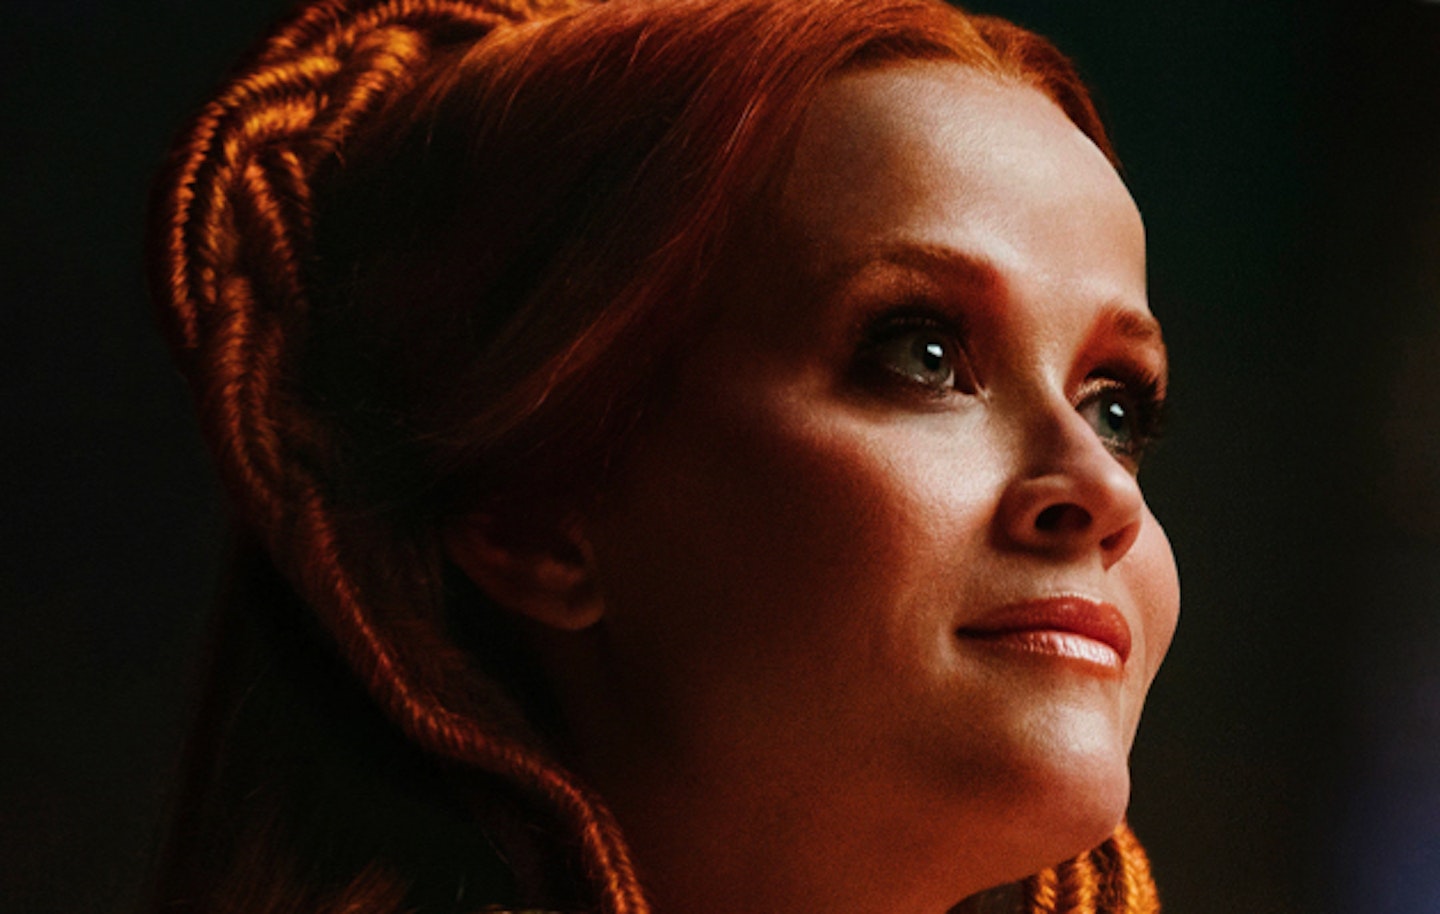 Reese Witherspoon in A Wrinkle In Time (crop)